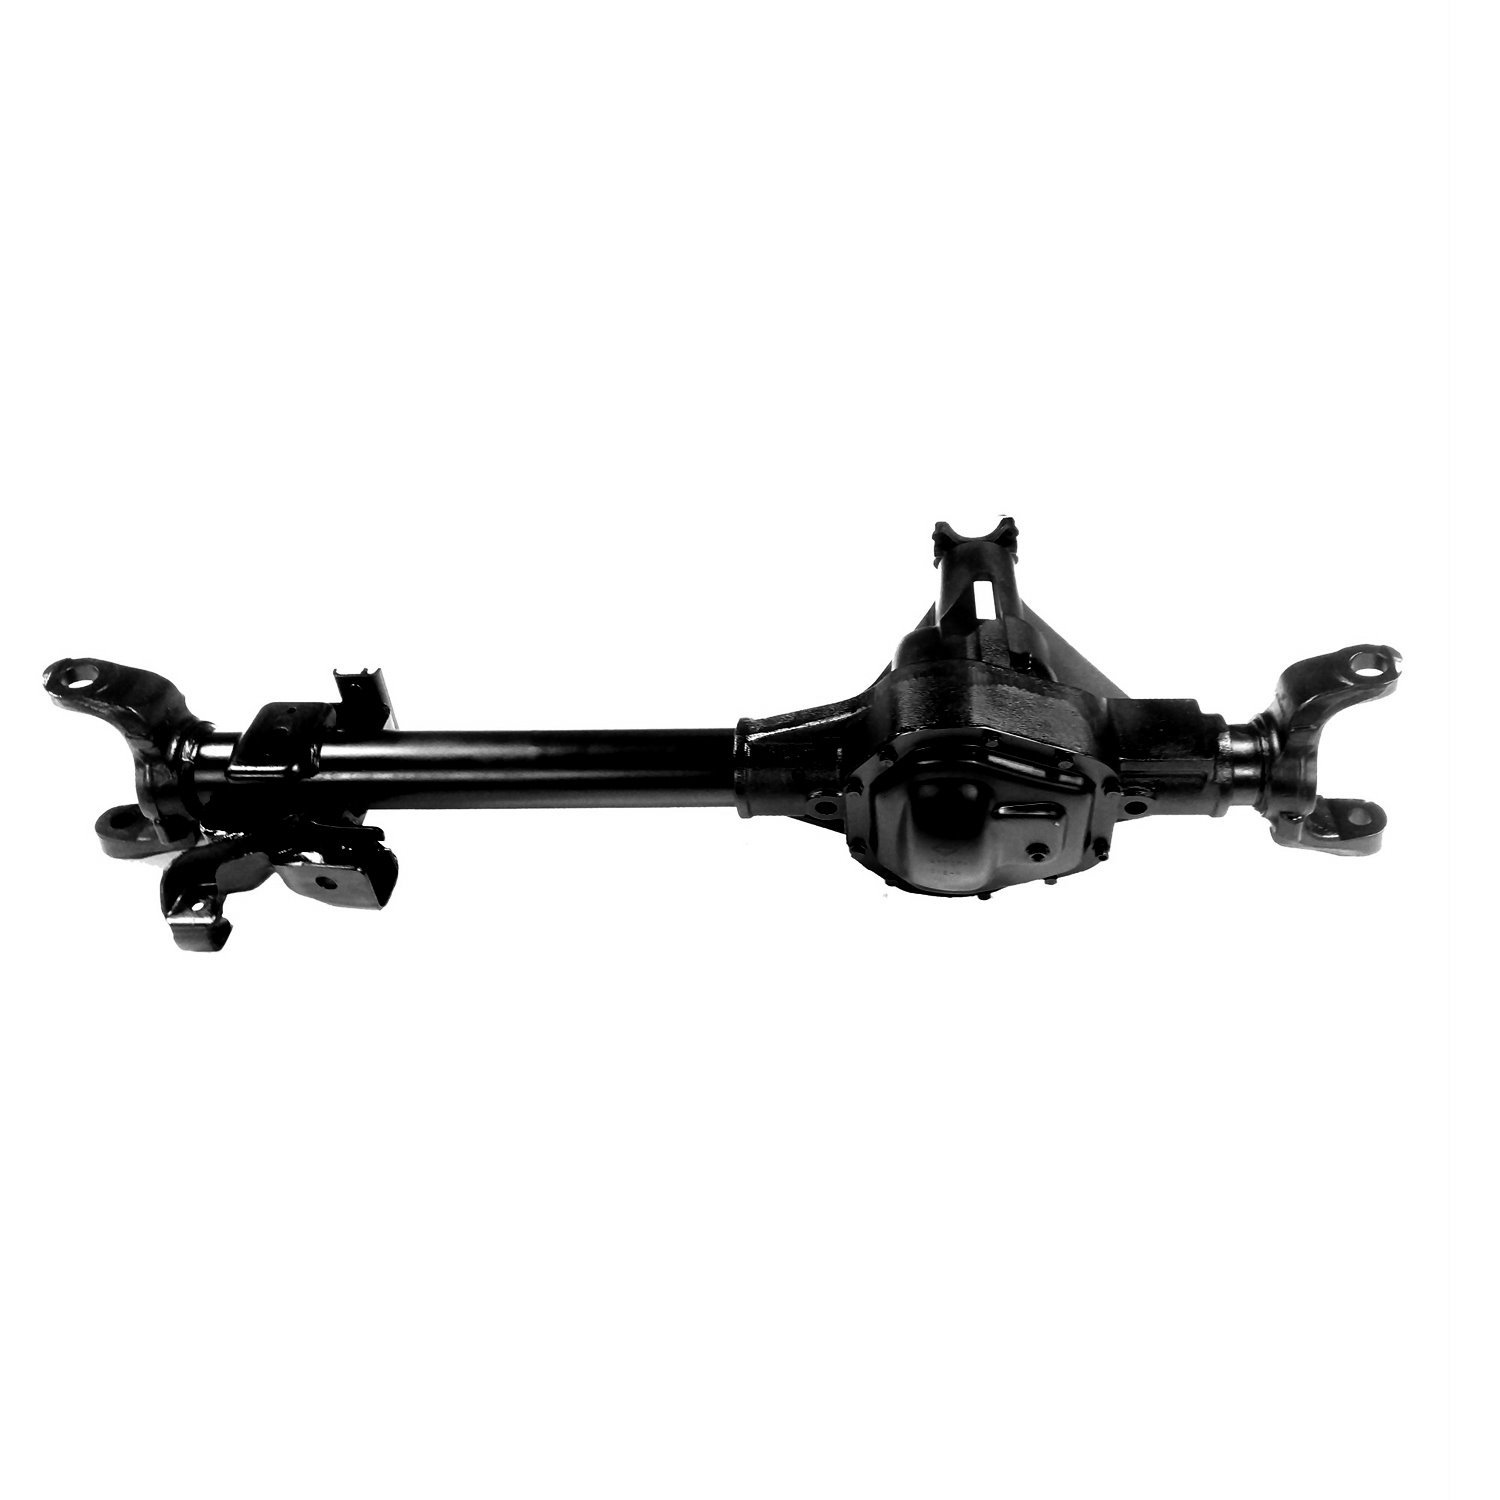 Remanufactured Complete Axle Assembly for Dana 60 08-10 Ford F250 & F350 4.30, SRW